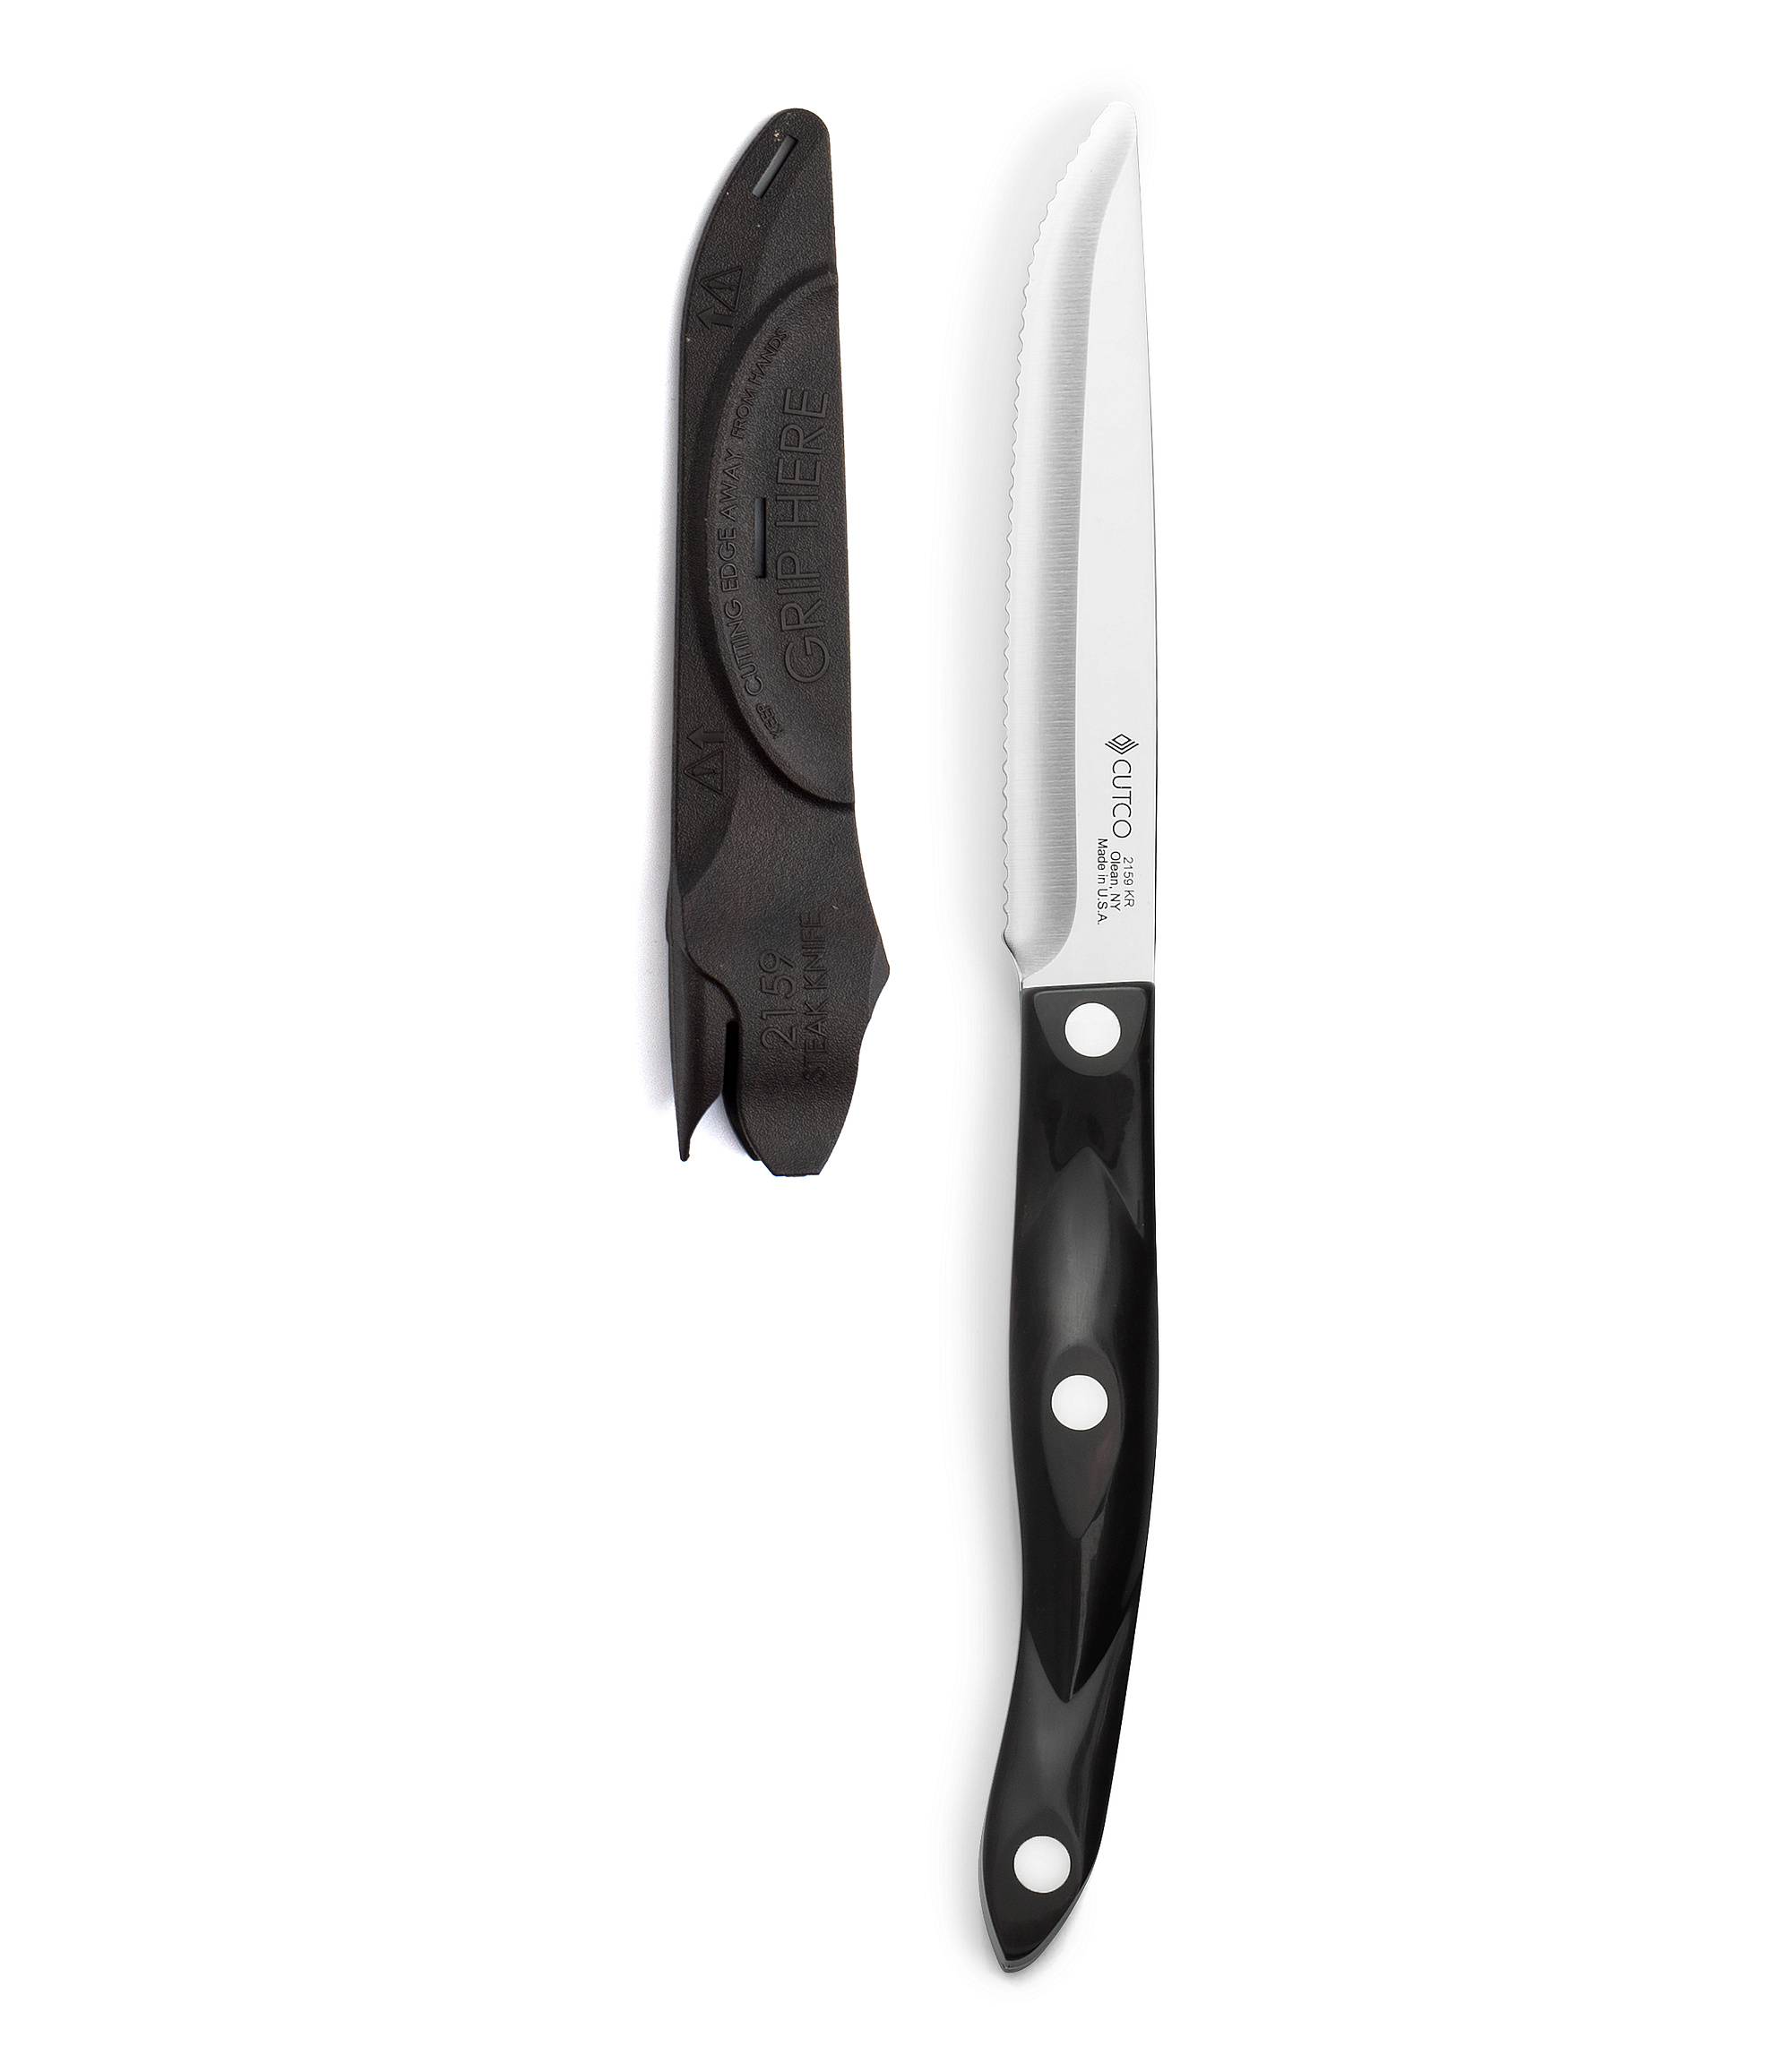 CUTCO introduces new steak knife that's American-made and built to last - CUTCO  Cutlery